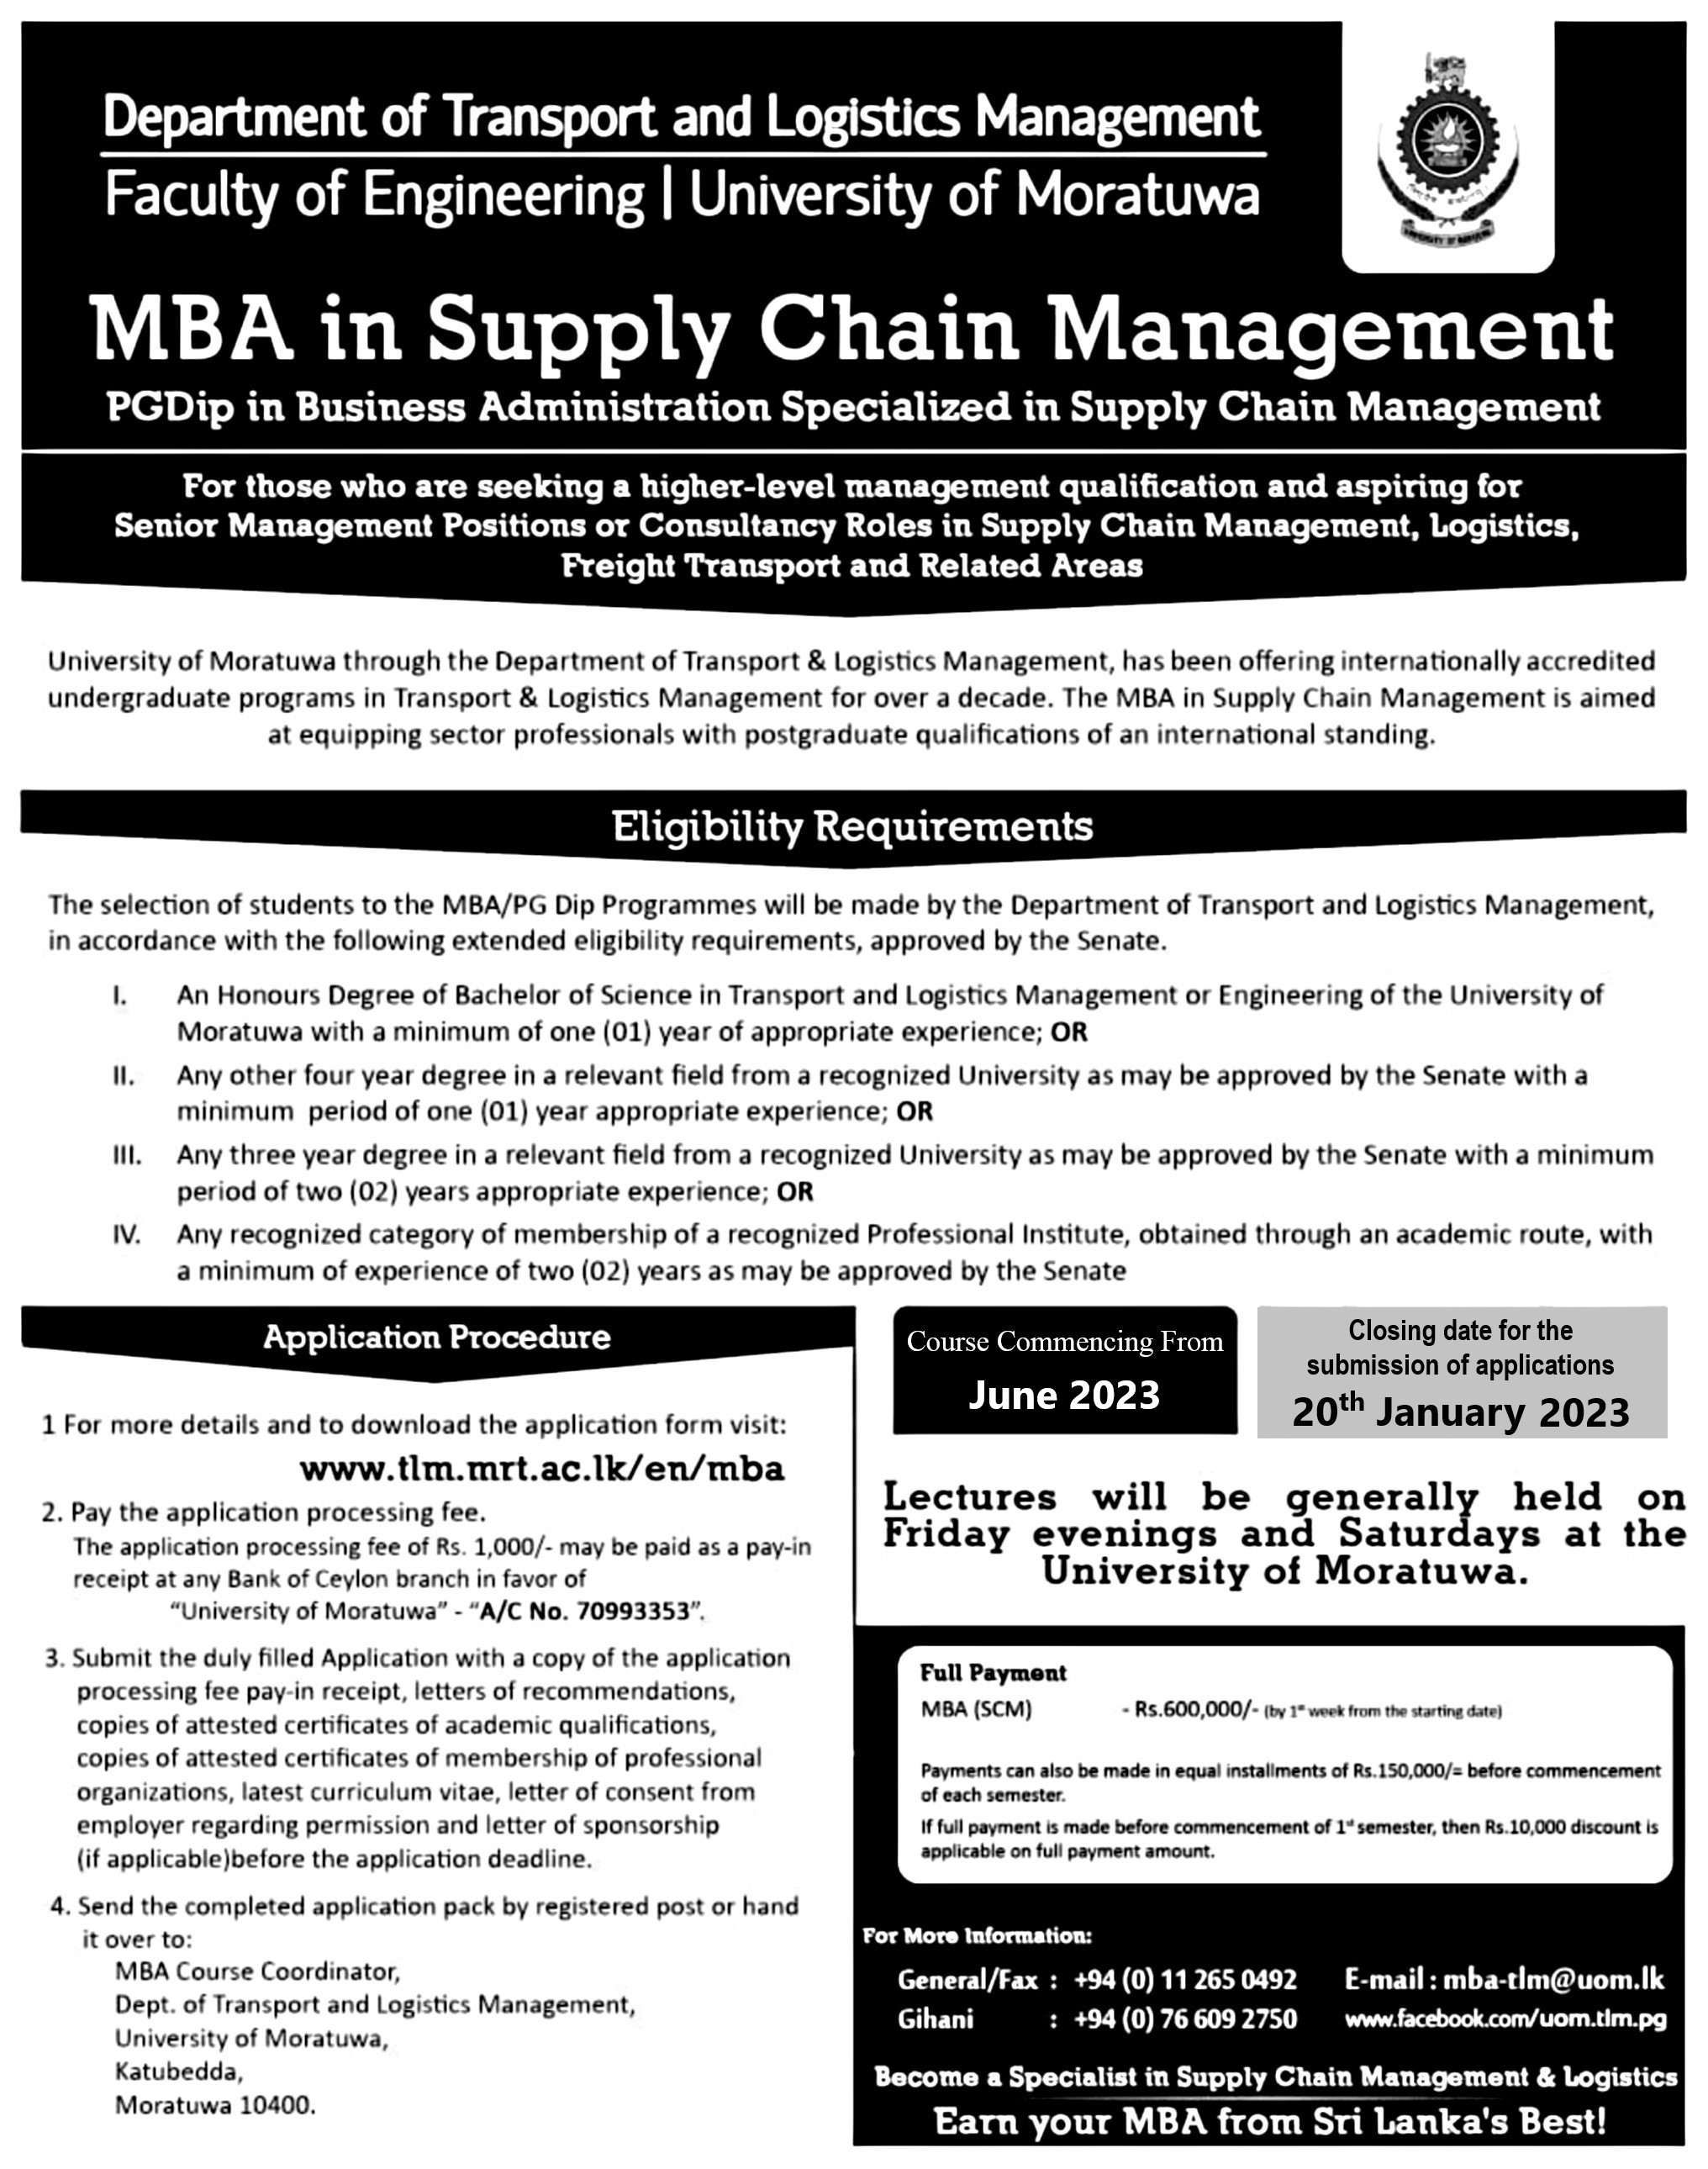 MBA in Supply Chain Management 2023 Intake